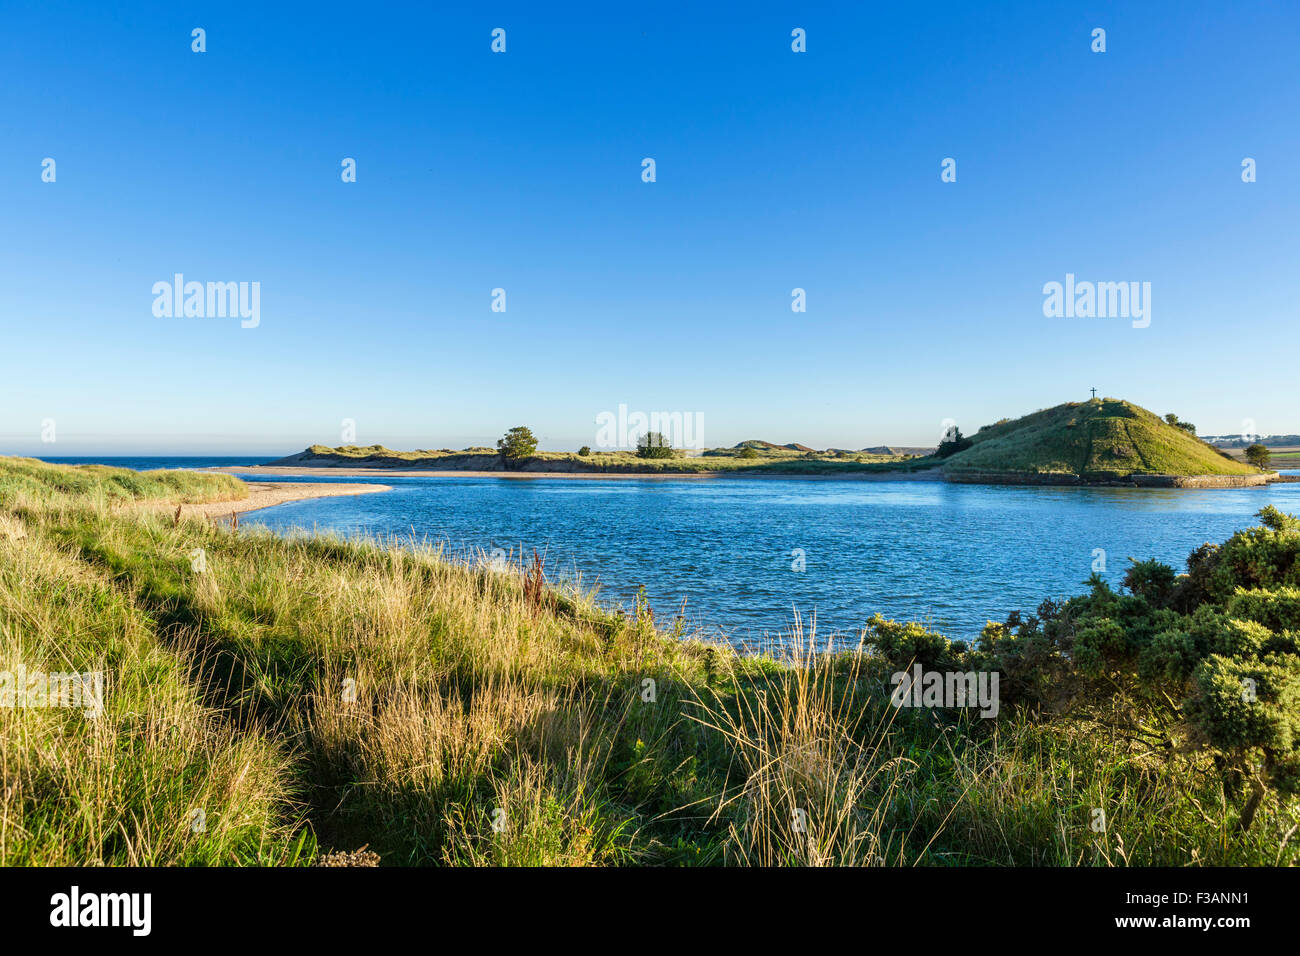 The mouth of the River Aln on the North Sea coast at Alnmouth, Northumberland, England, UK Stock Photo